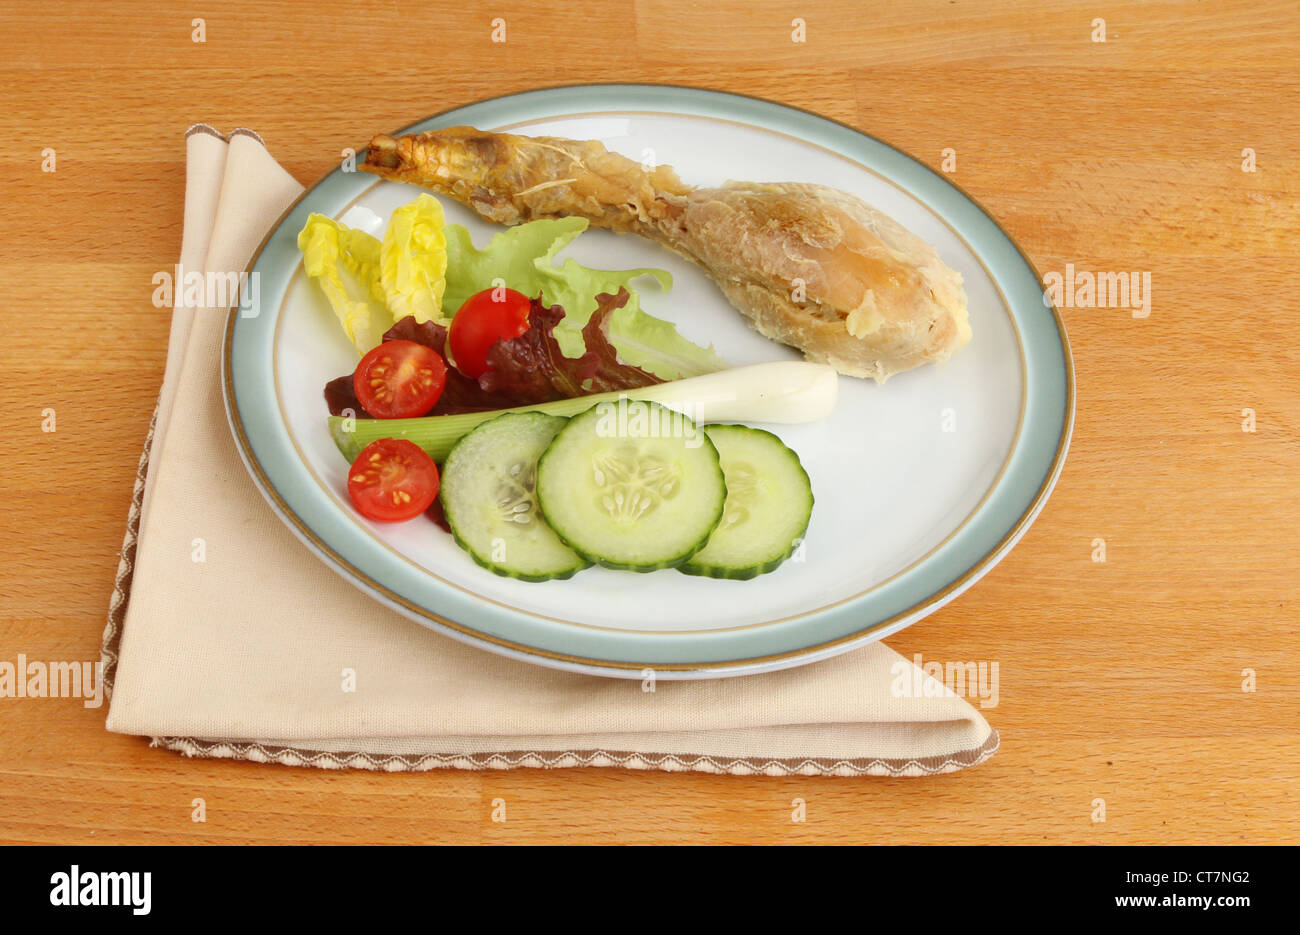 Chicken drumstick salad on a plate with a serviette on a wooden surface Stock Photo